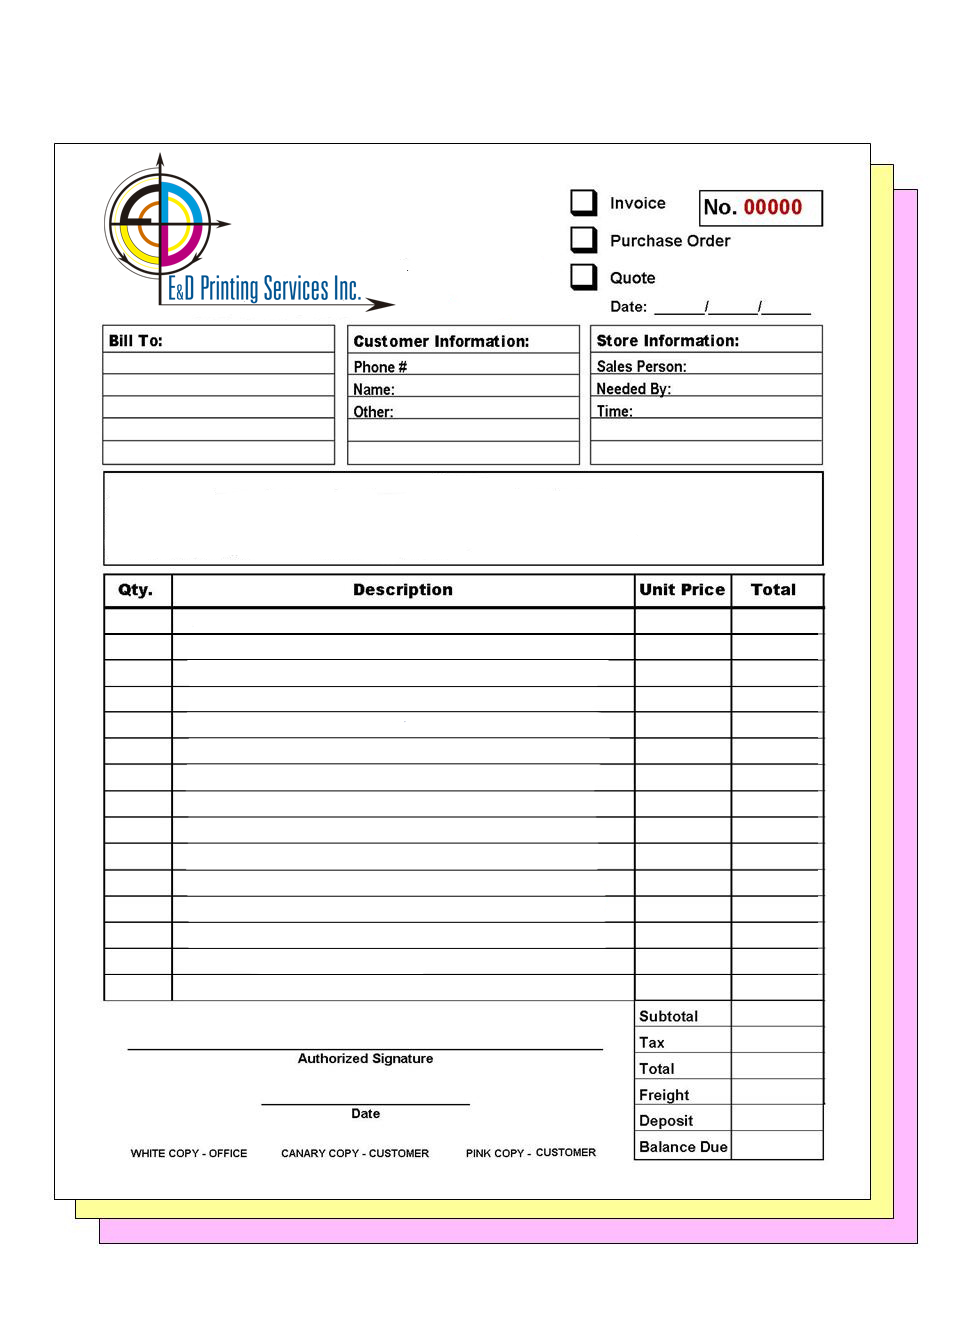 Carbonless Forms - Custom Business Forms - NCR Forms